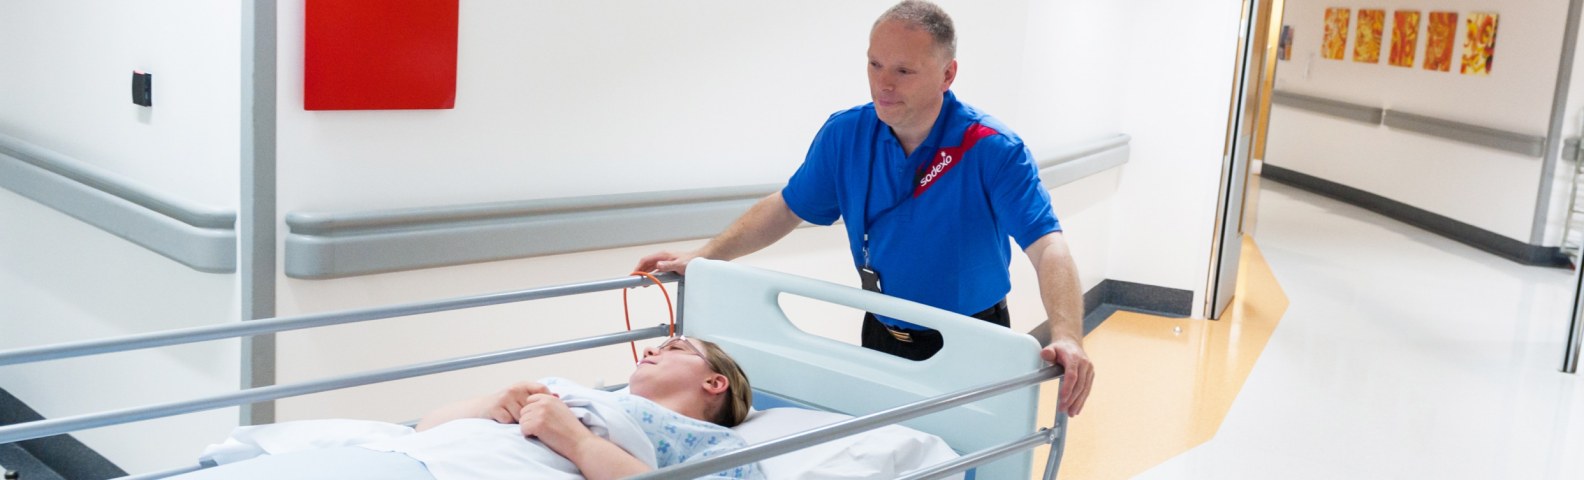 A man gently pushing a woman in a hospital bed